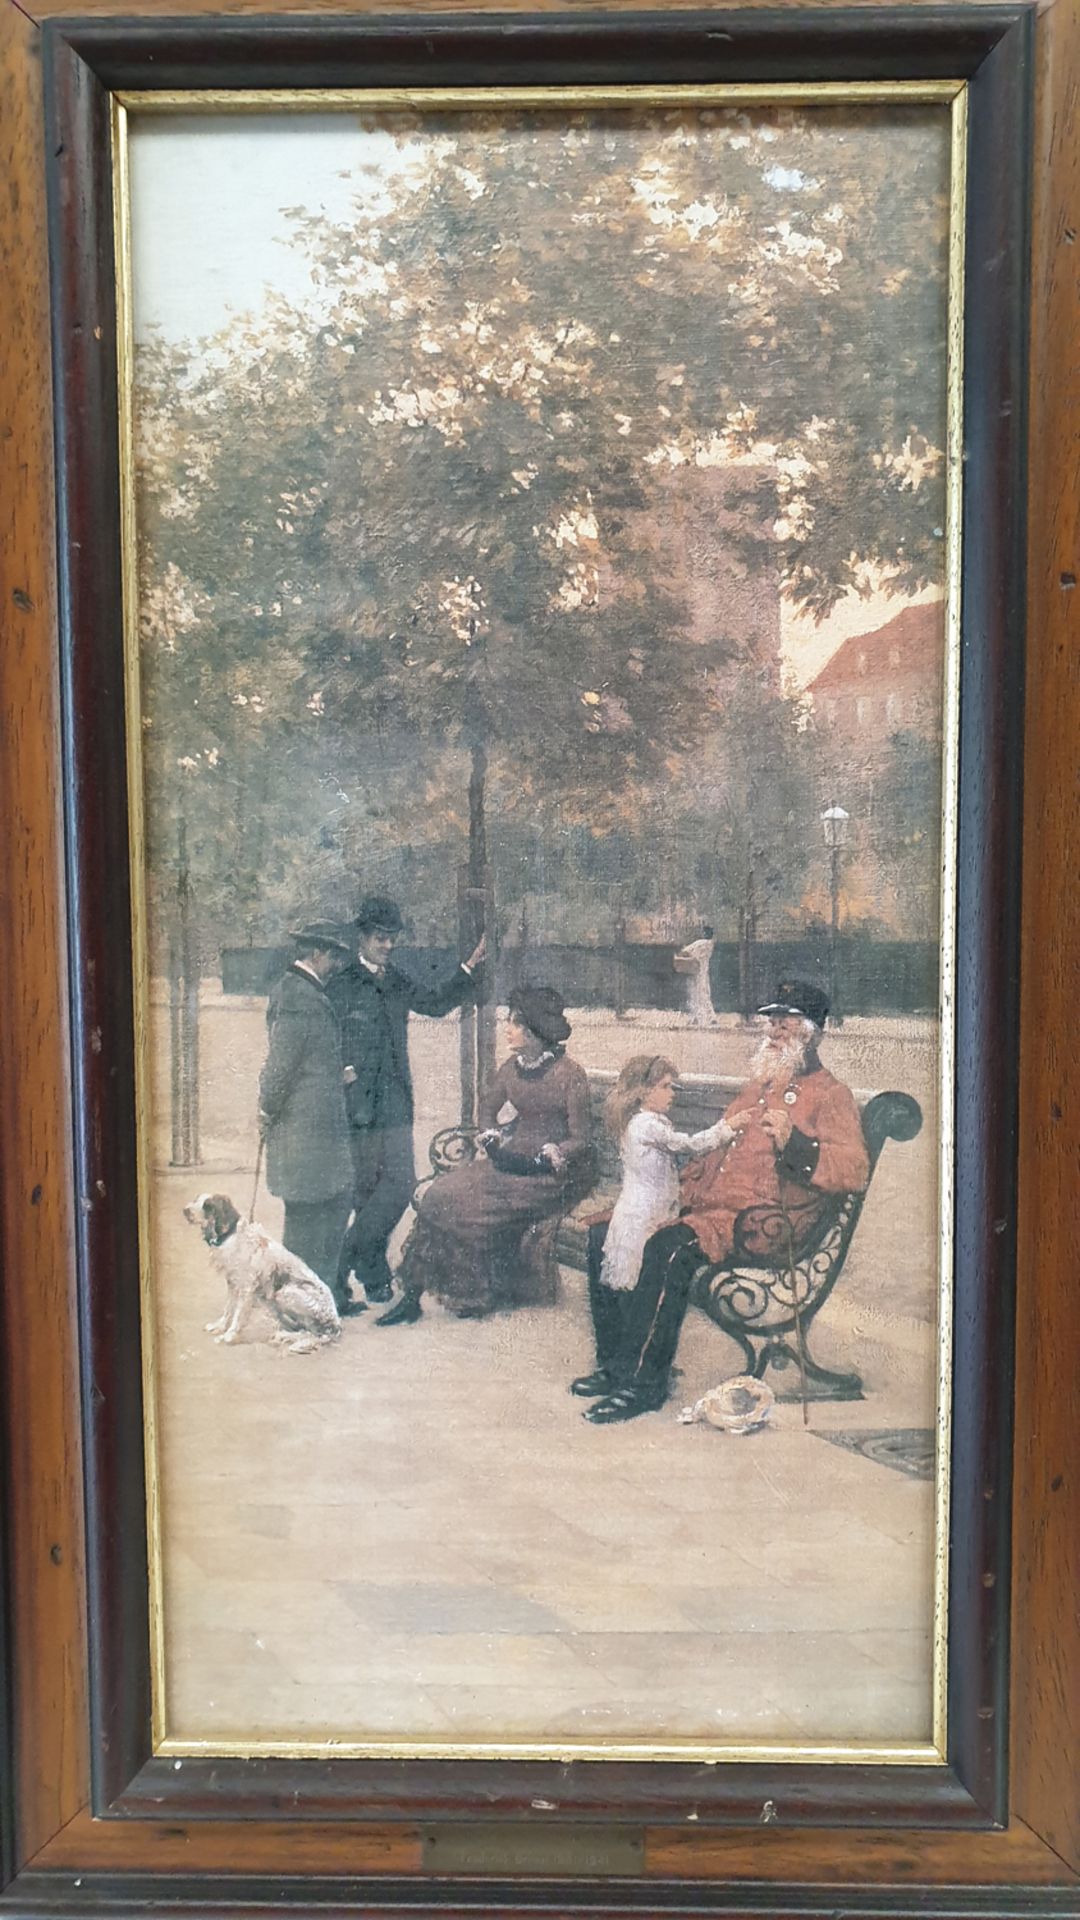 ALONG THE EMBANKMENT (DETAIL)' Framed Picture by Frederick Brown 1851 - 1941. - Image 2 of 3